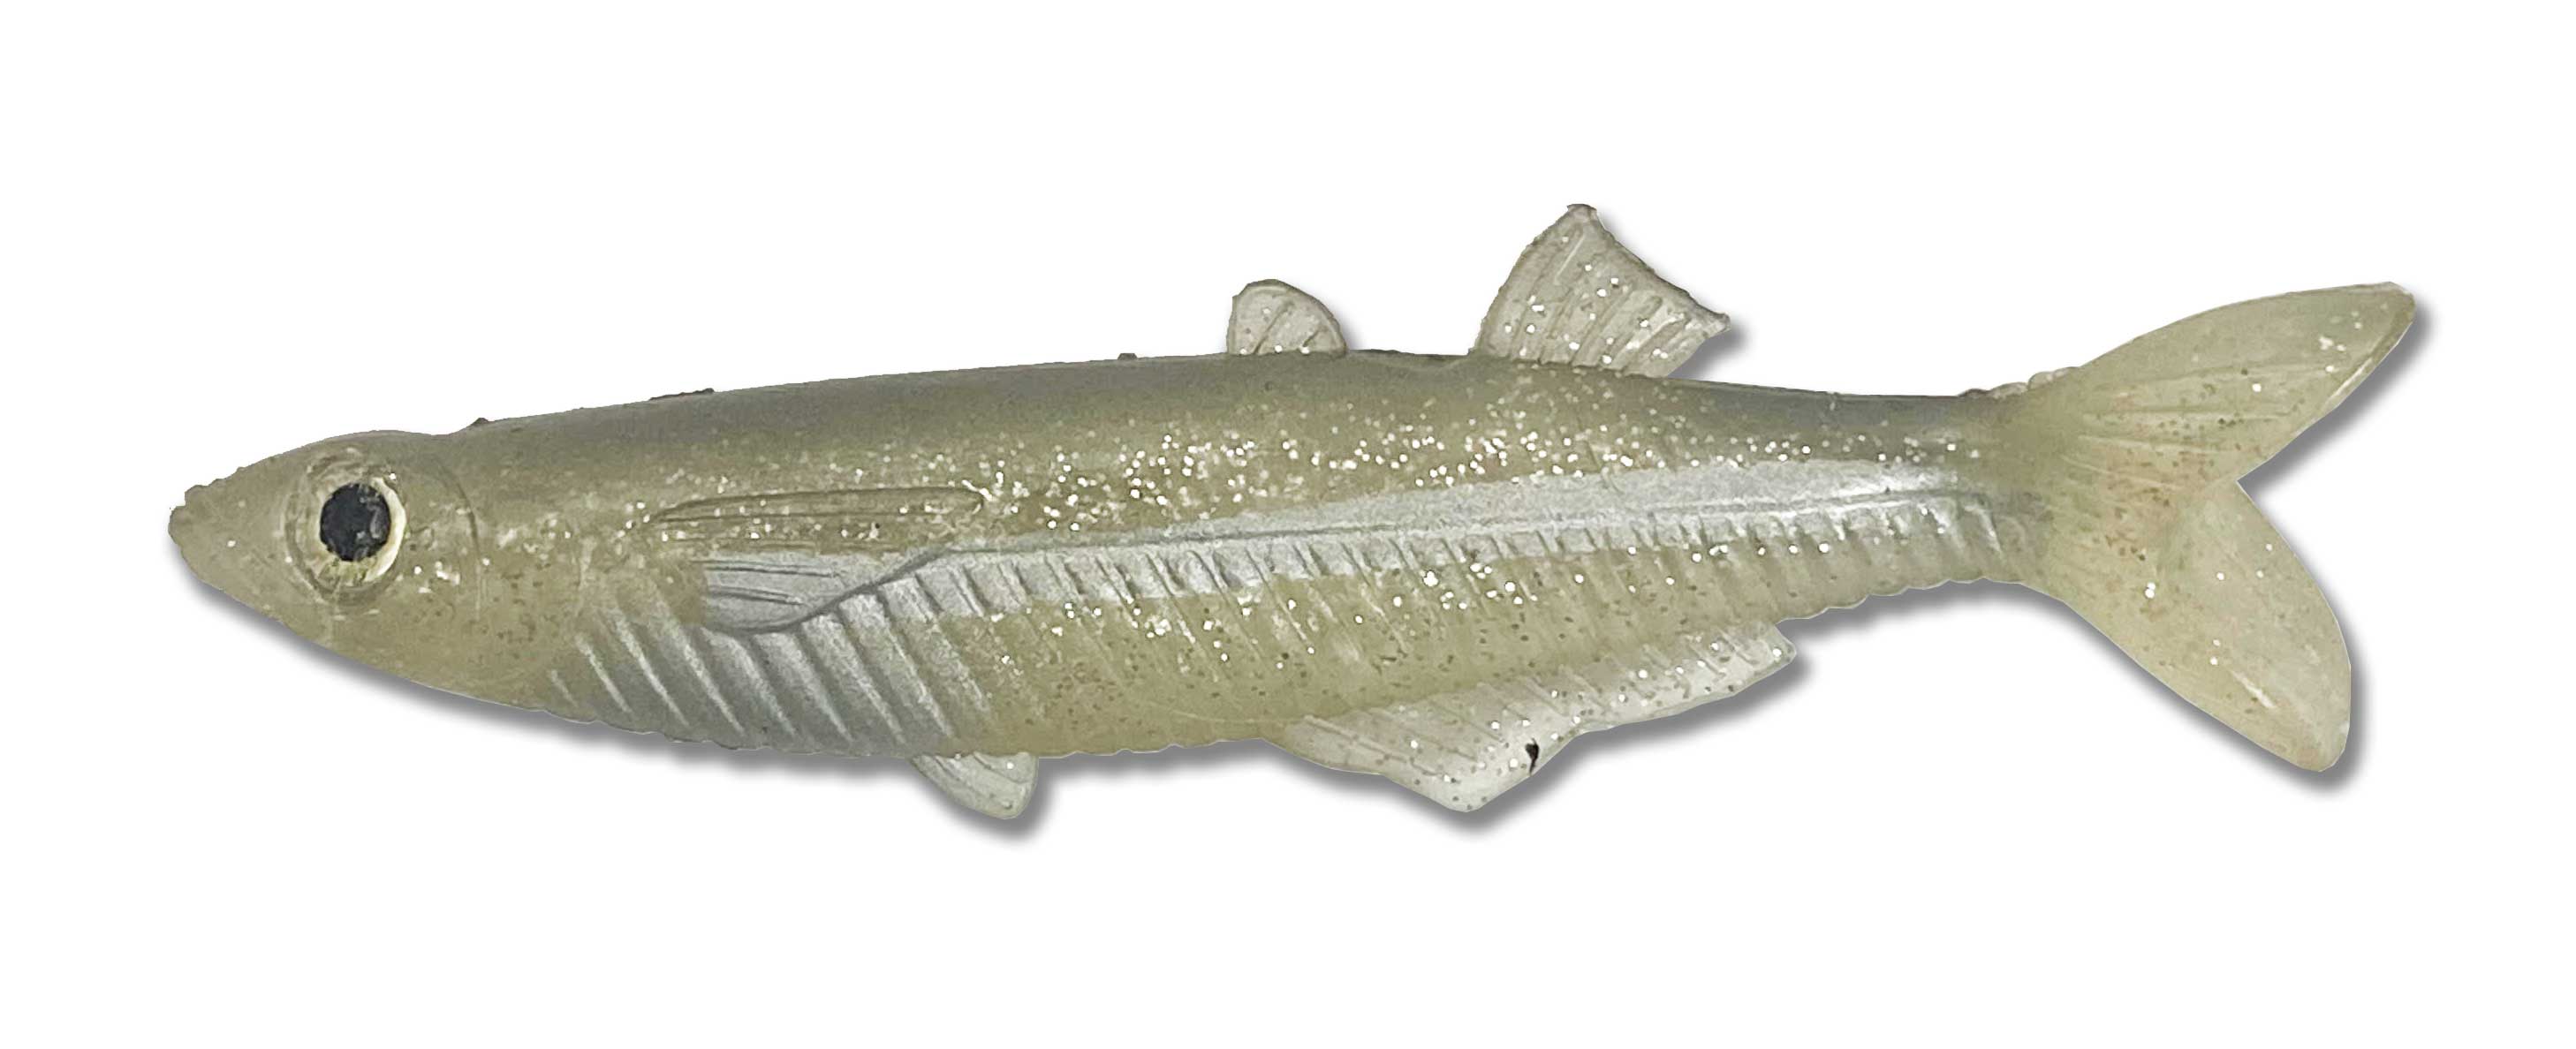 Almost Alive 3.25 Soft Glass Minnow Lures 5 Pack Natural Artificial Glass Minnow  Silver Flake 3.25 5 Pack [AAGM350] - $3.63 : Almost Alive Lures, The best  there ever was.